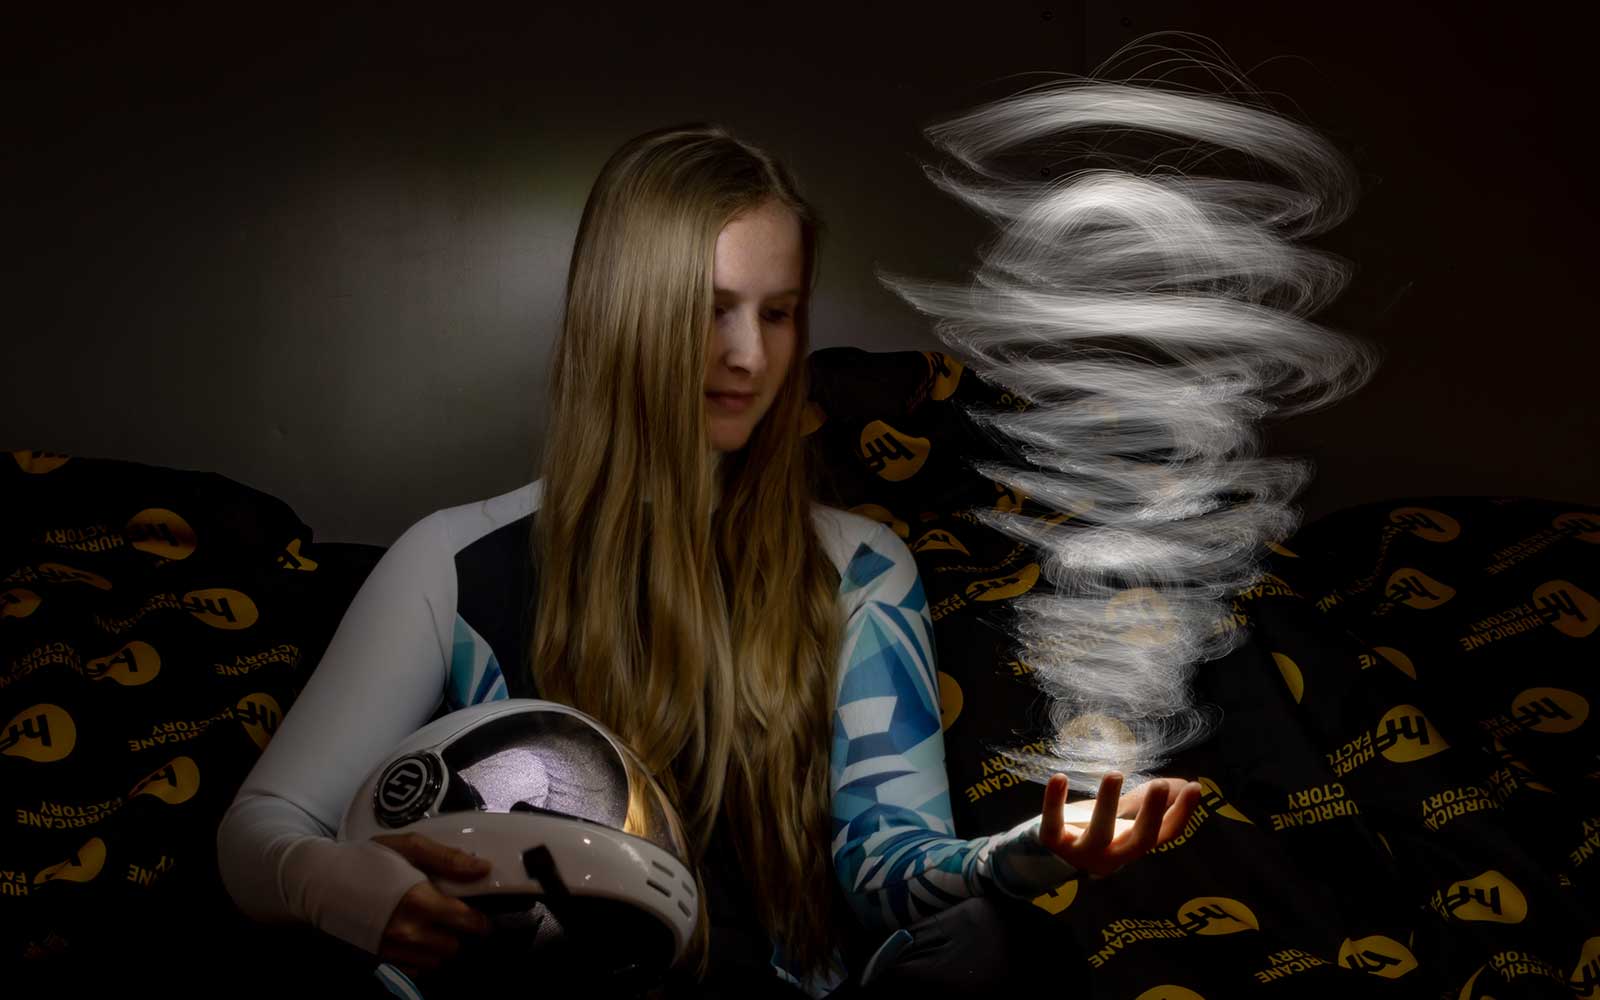 Light Painting Portrait of Luise with her Helmet and a Hurricane in her hand